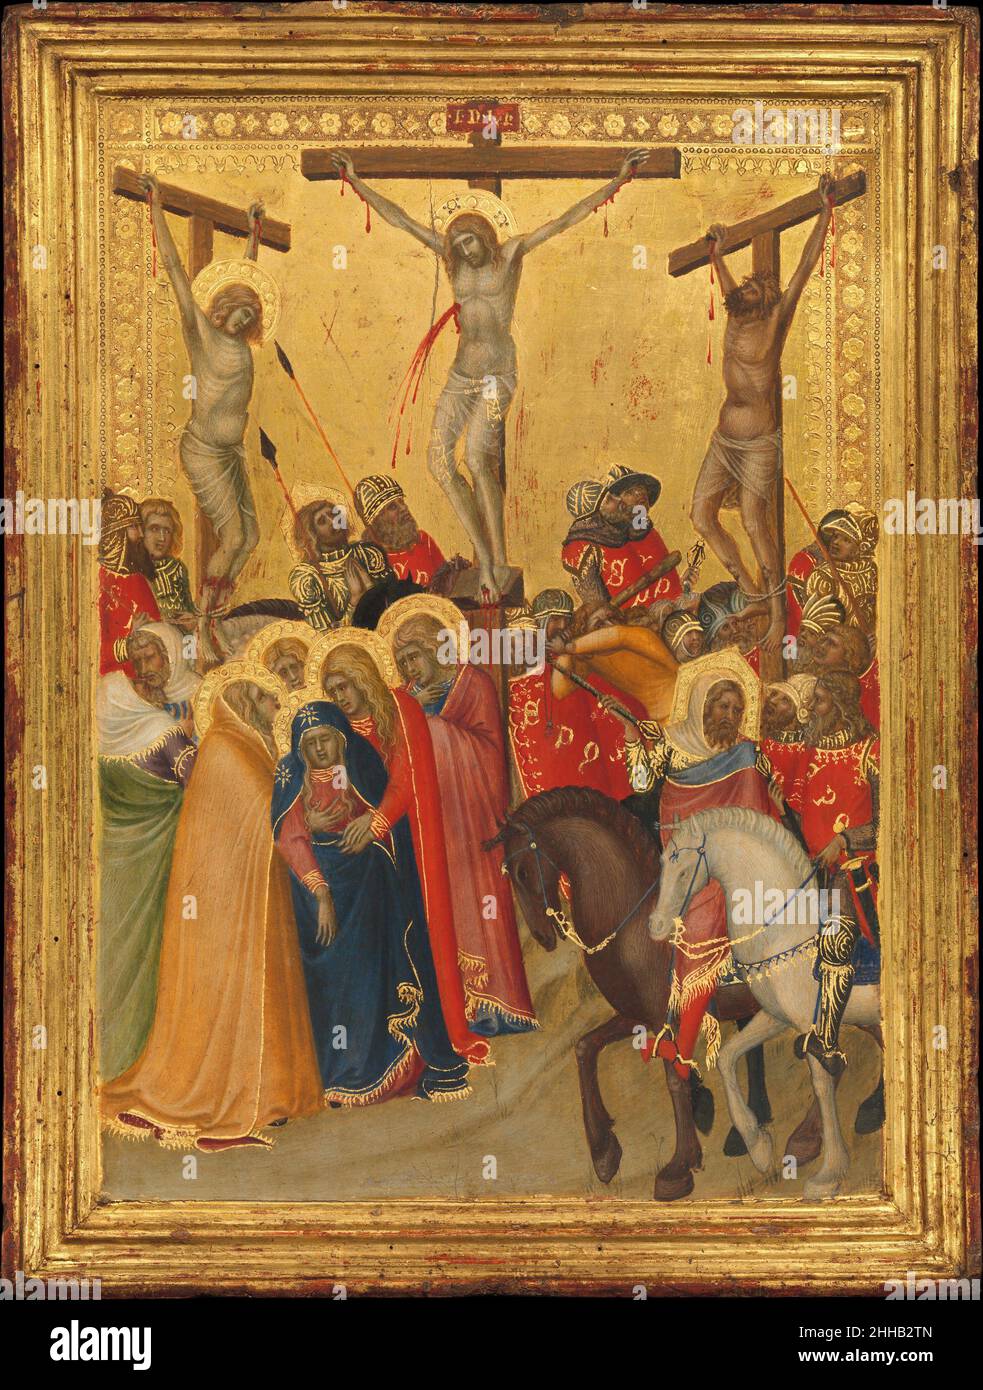 The Crucifixion 1340s Pietro Lorenzetti Italian One of the great innovators of European painting, Pietro Lorenzetti imbued this familiar biblical subject with a new sense of pathos and dramatic intensity. Details such as the piercing of Christ's side with a spear, the breaking of the legs of the thieves, and the Virgin swooning into the arms of her companions ensure an emotional response from the viewer. A century later, Van Eyck, in his painting in The Met, added to these pictorial strategies the extraordinary naturalism of a landscape setting replacing the gold ground of Italian painting and Stock Photo